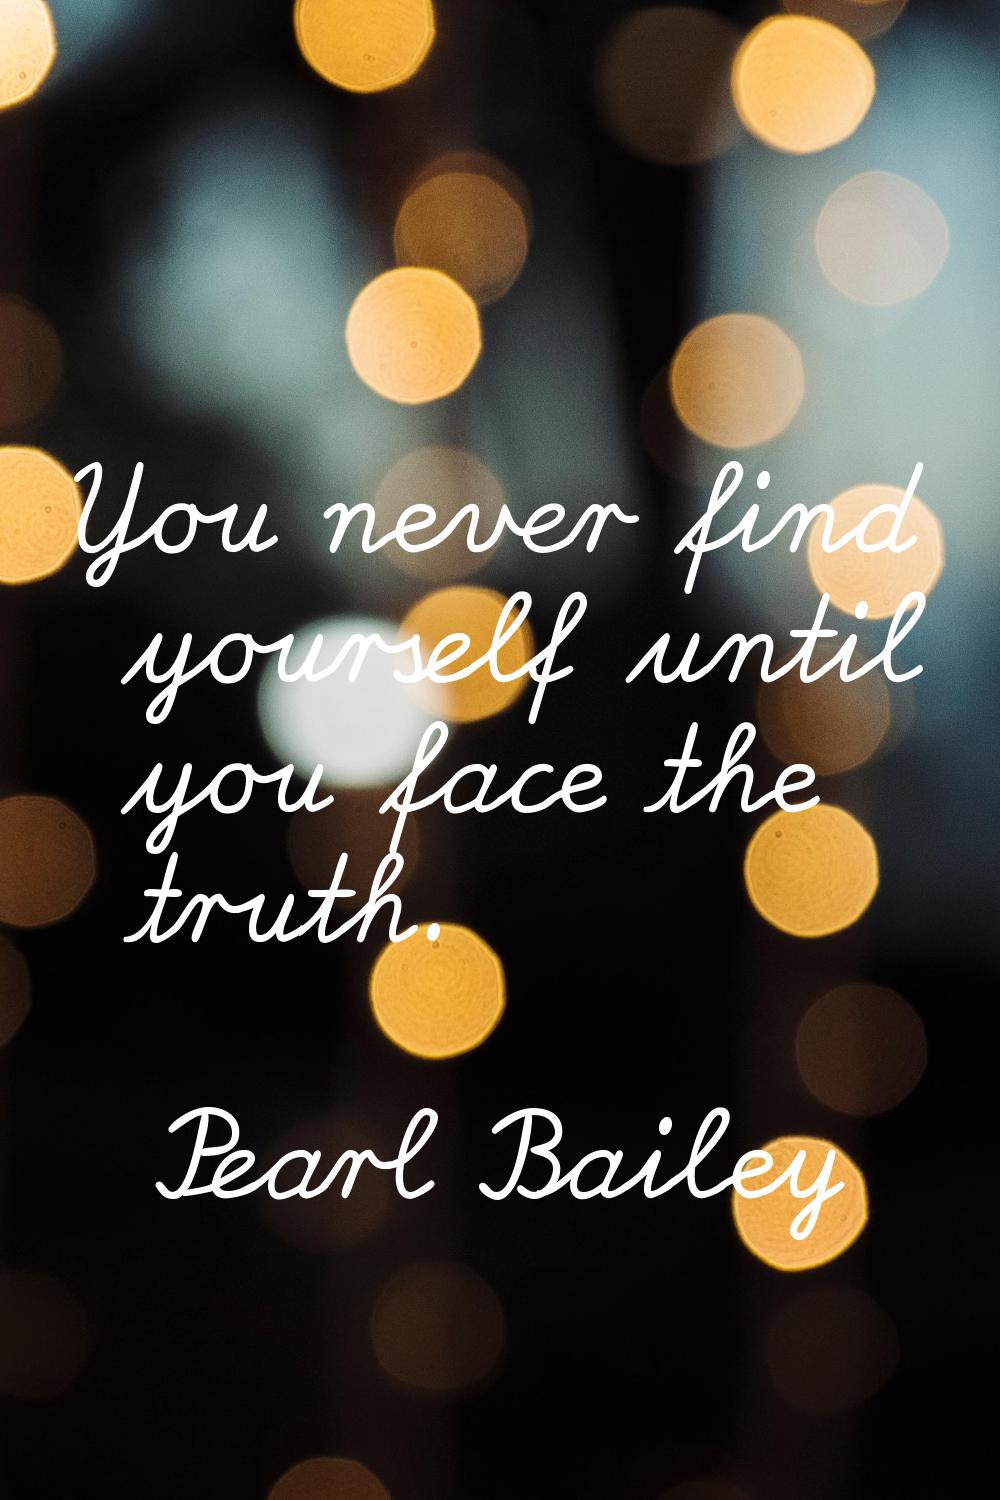 You never find yourself until you face the truth.